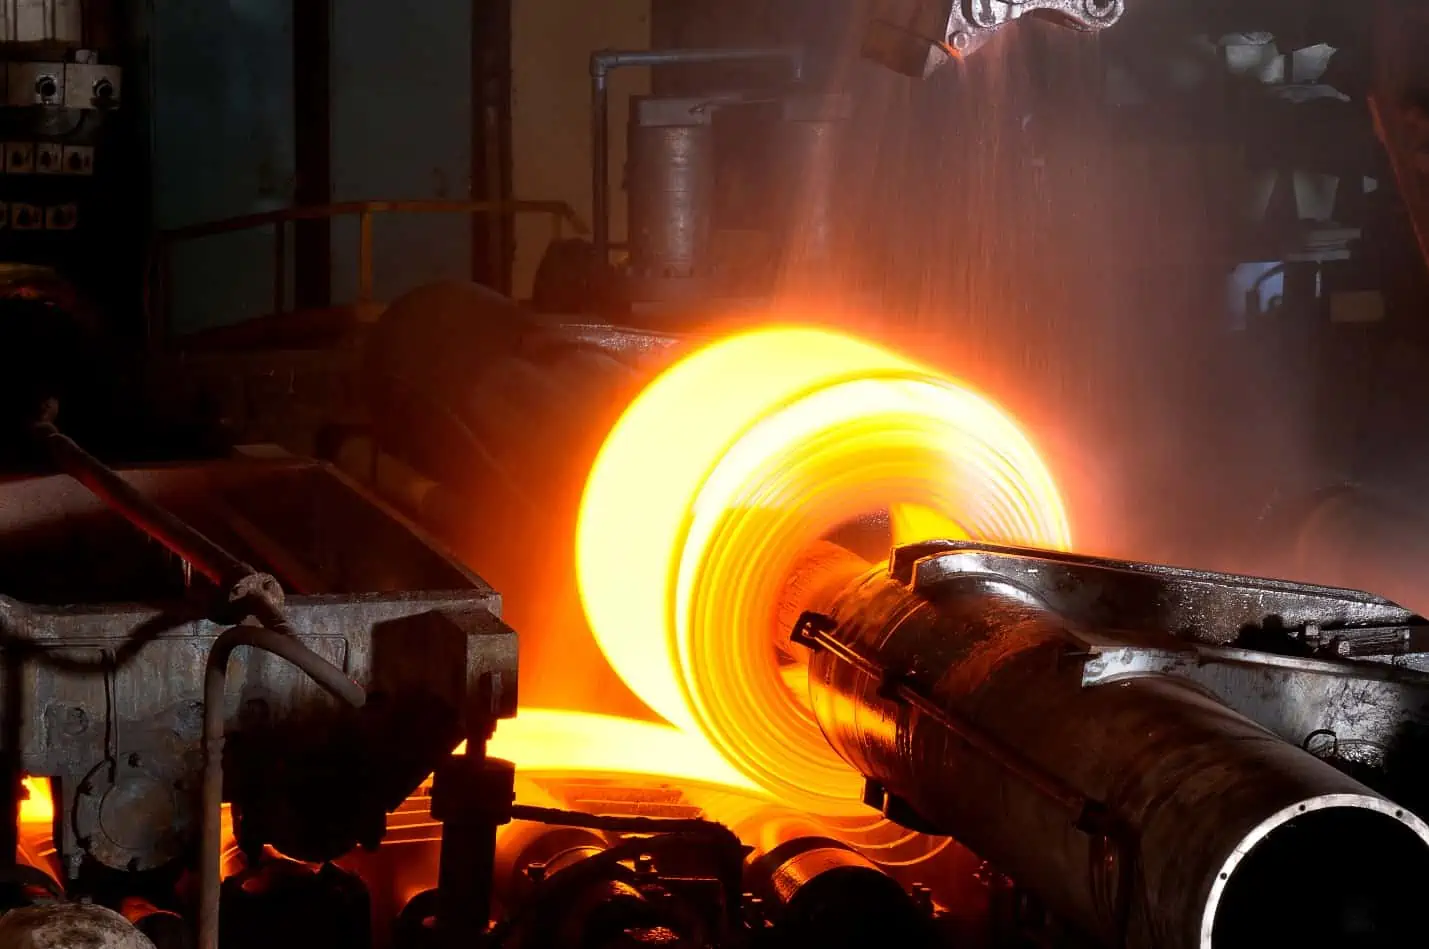 steel manufacturing and processing